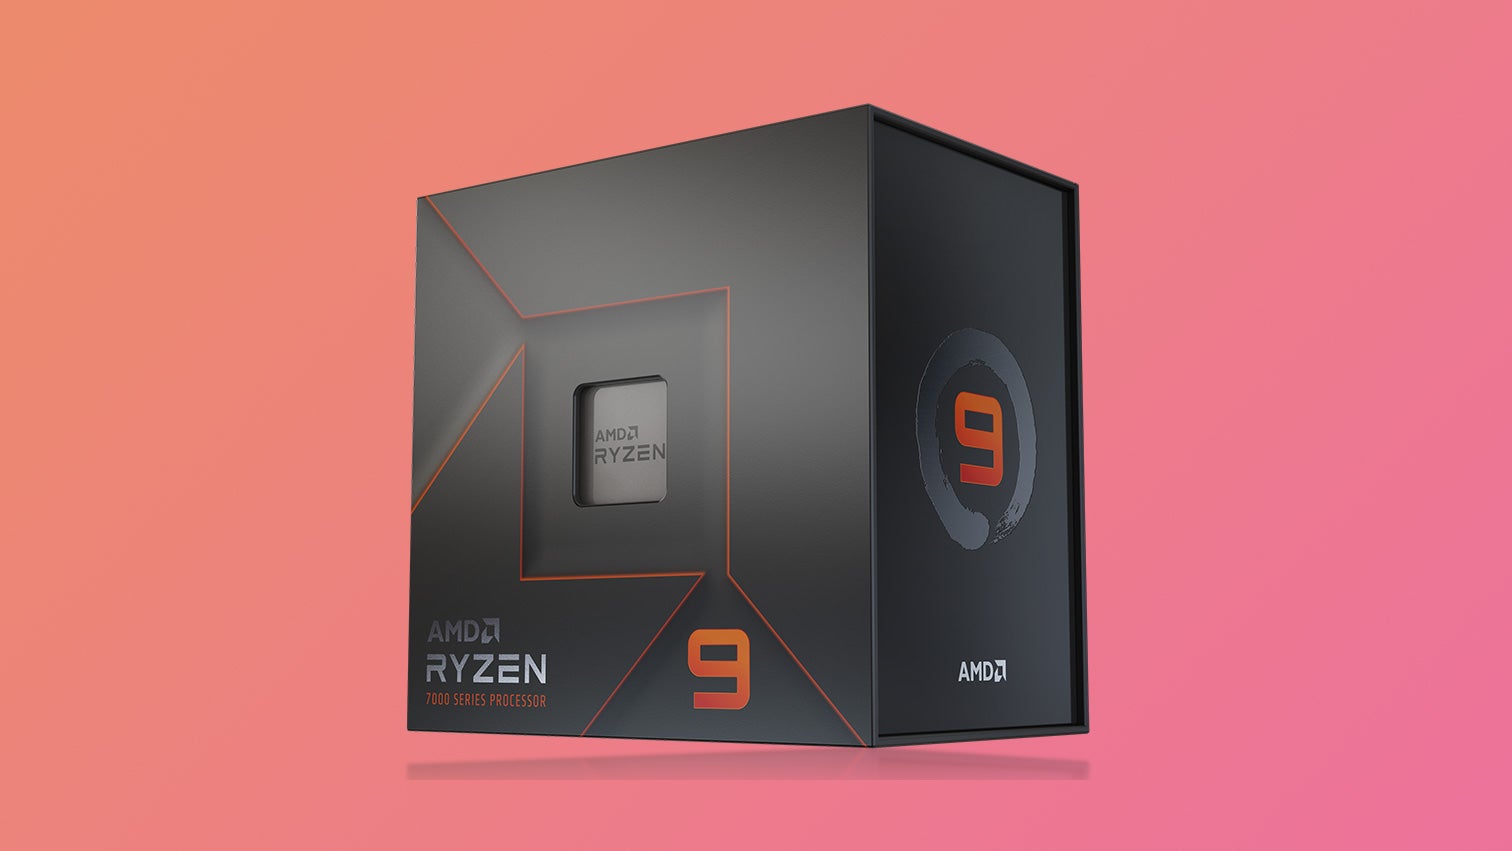 Save 10% off AMD's entire Ryzen 7000 CPU lineup with this eBay code